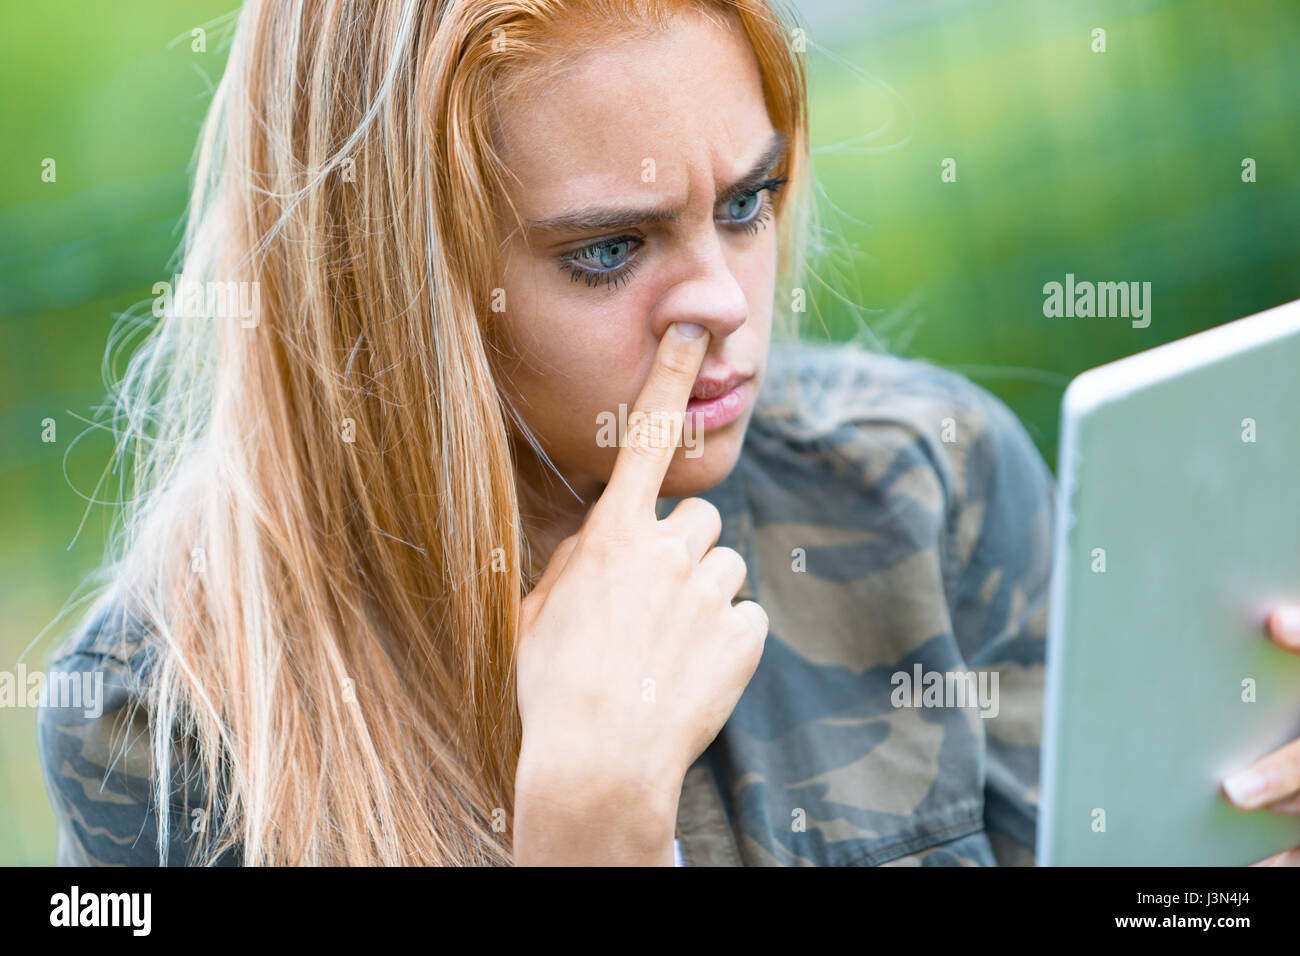 funny portrait of a girl picking her nose while reading on a digital tablet something she found out in the internet Stock Photo